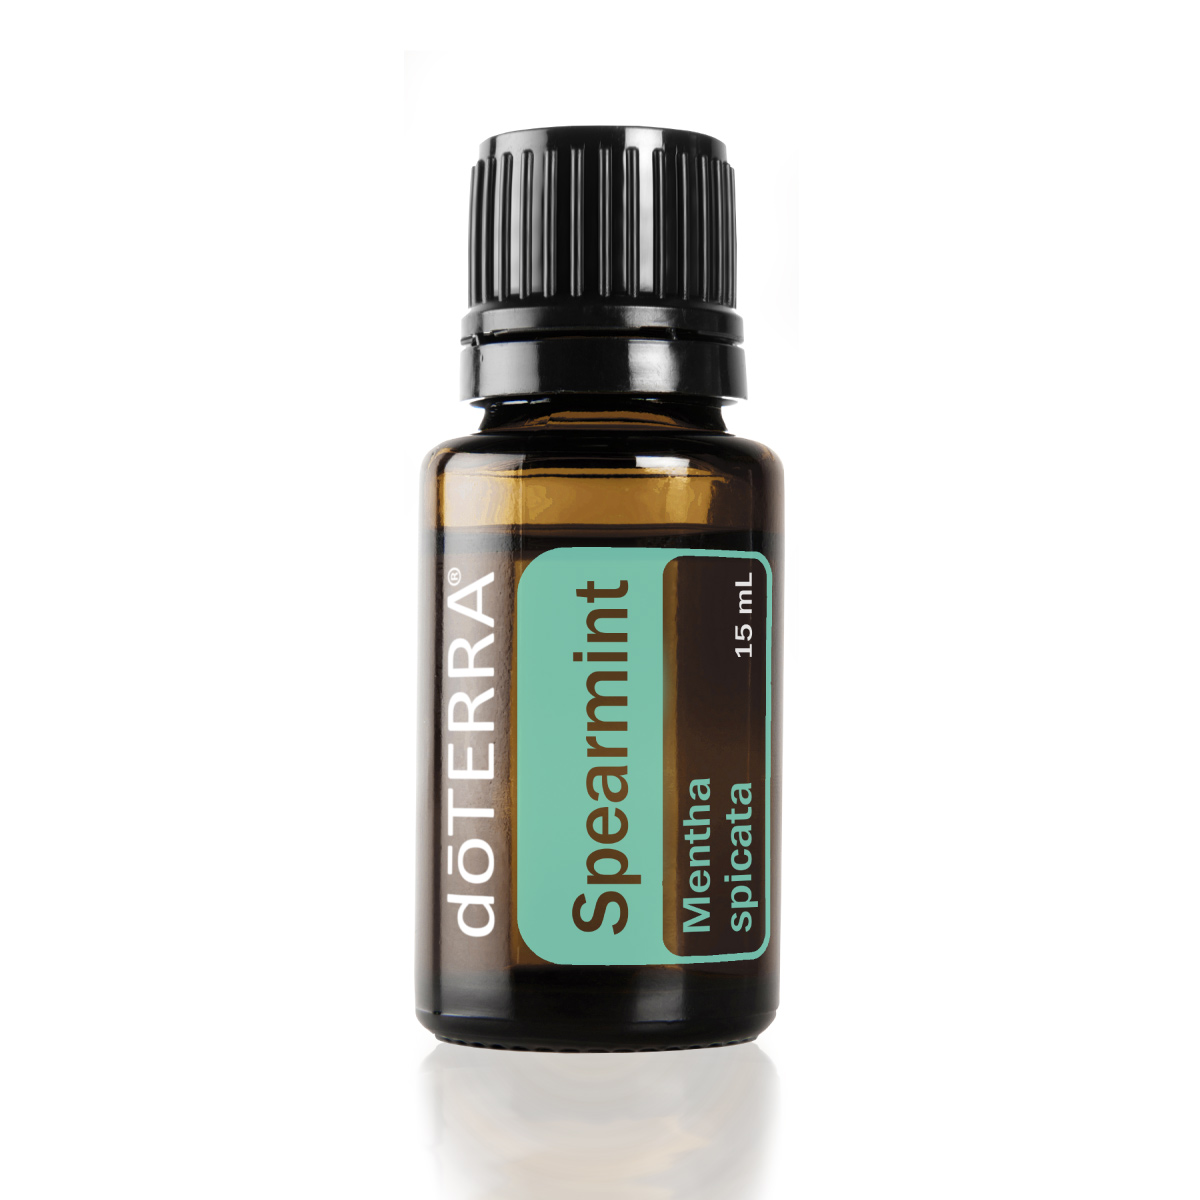 Bottle of doTERRA Spearmint oil. What can you use Spearmint oil for? Spearmint oil can be used to promote fresh breath, to add flavor when cooking, or to reduce occasional stomach upset.